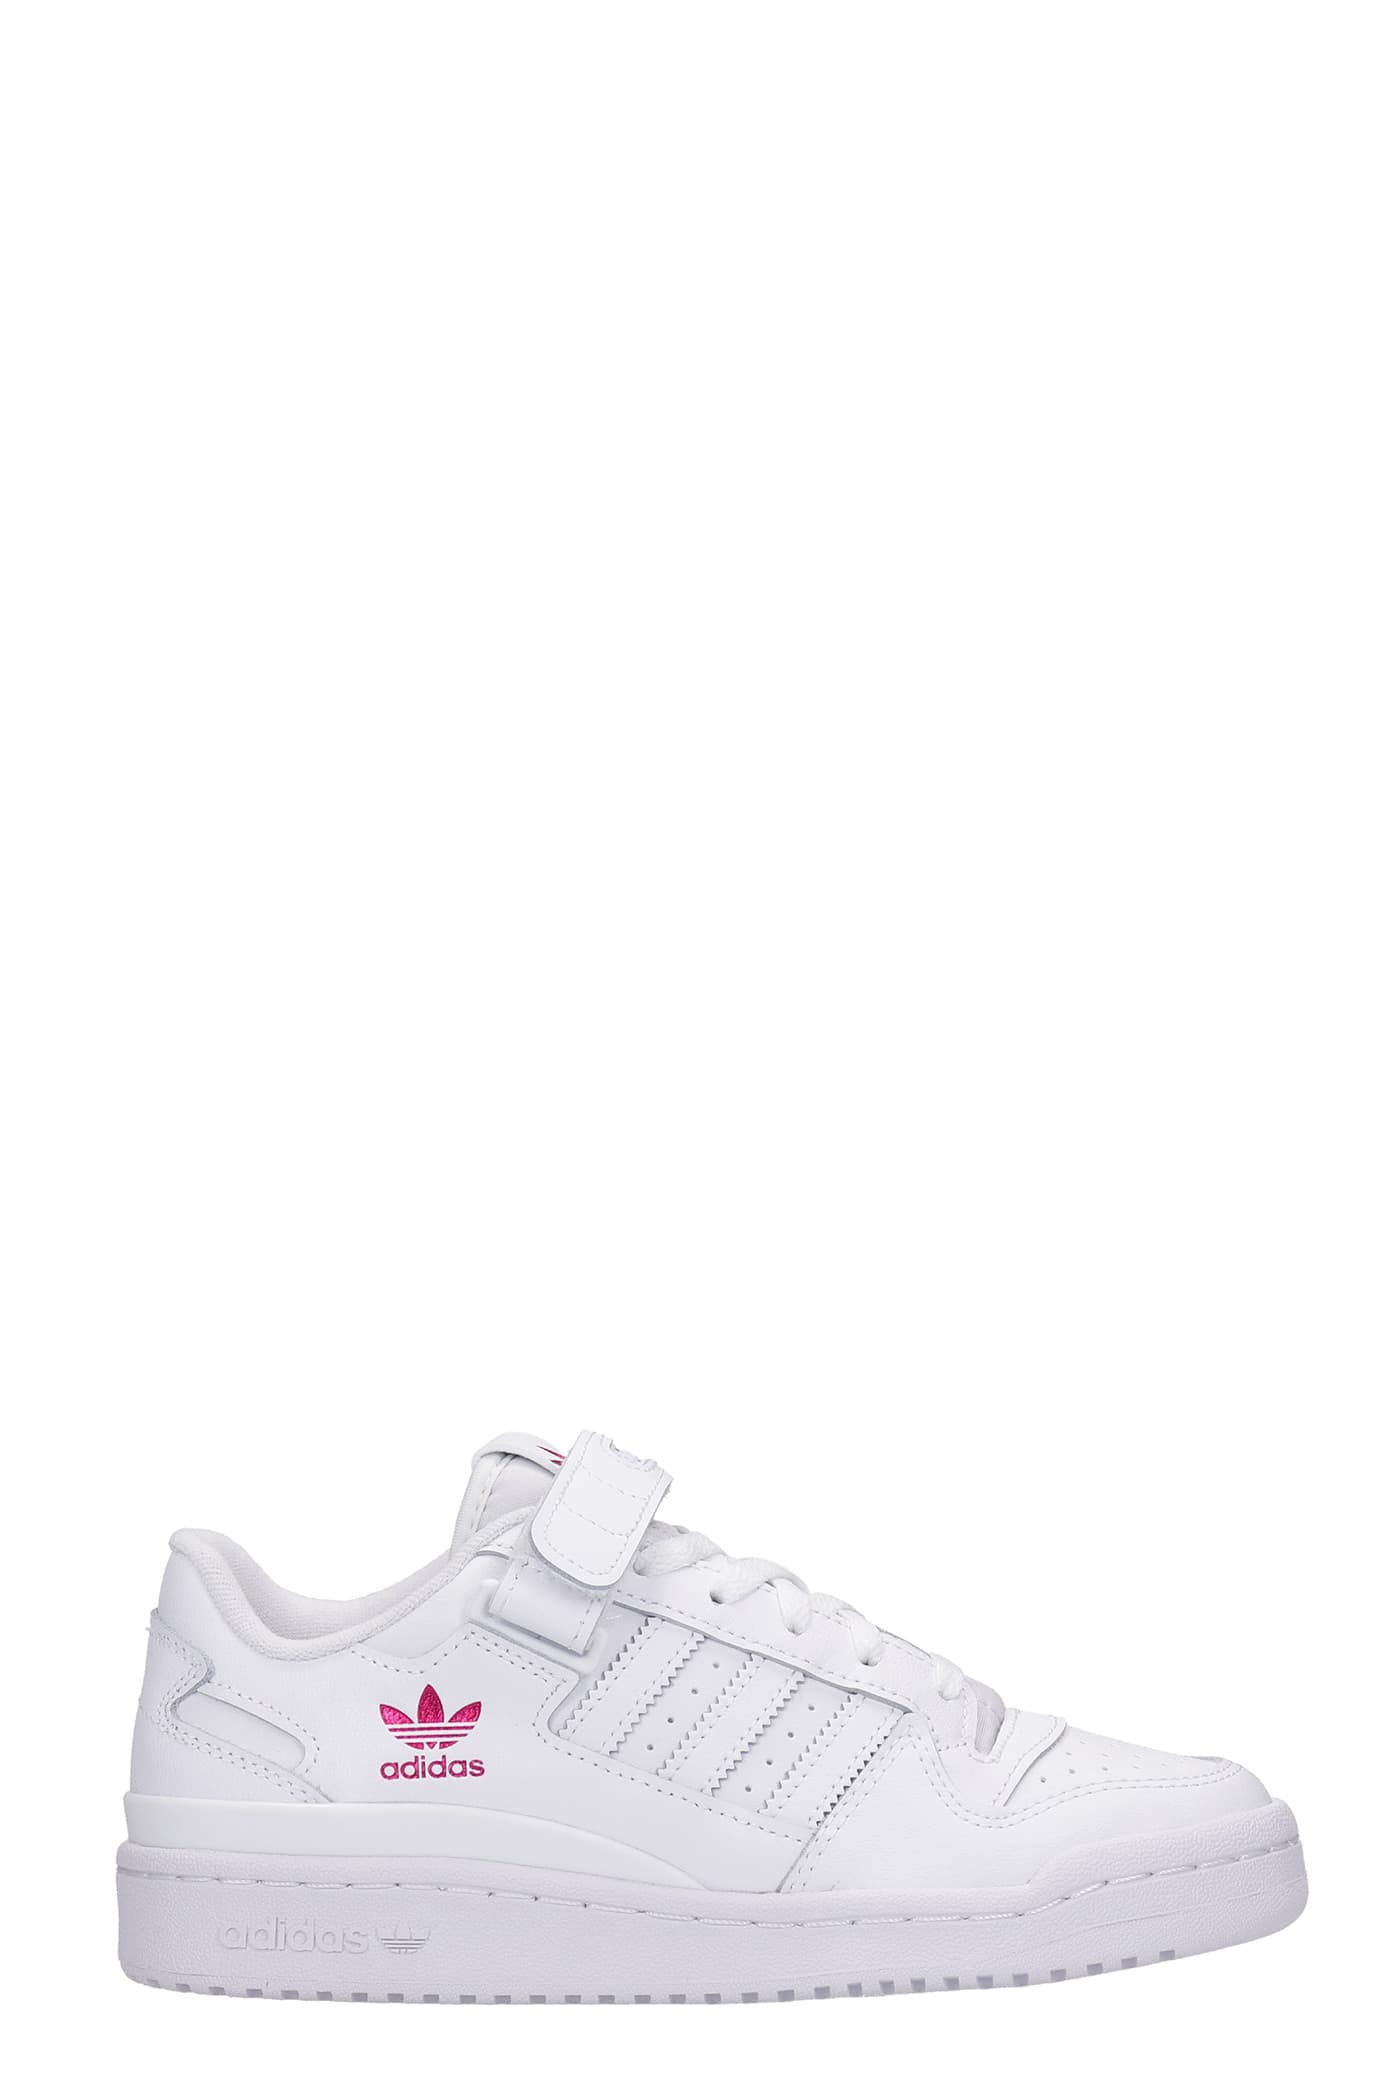 ADIDAS ORIGINALS FORUM LOW SNEAKERS IN WHITE LEATHER